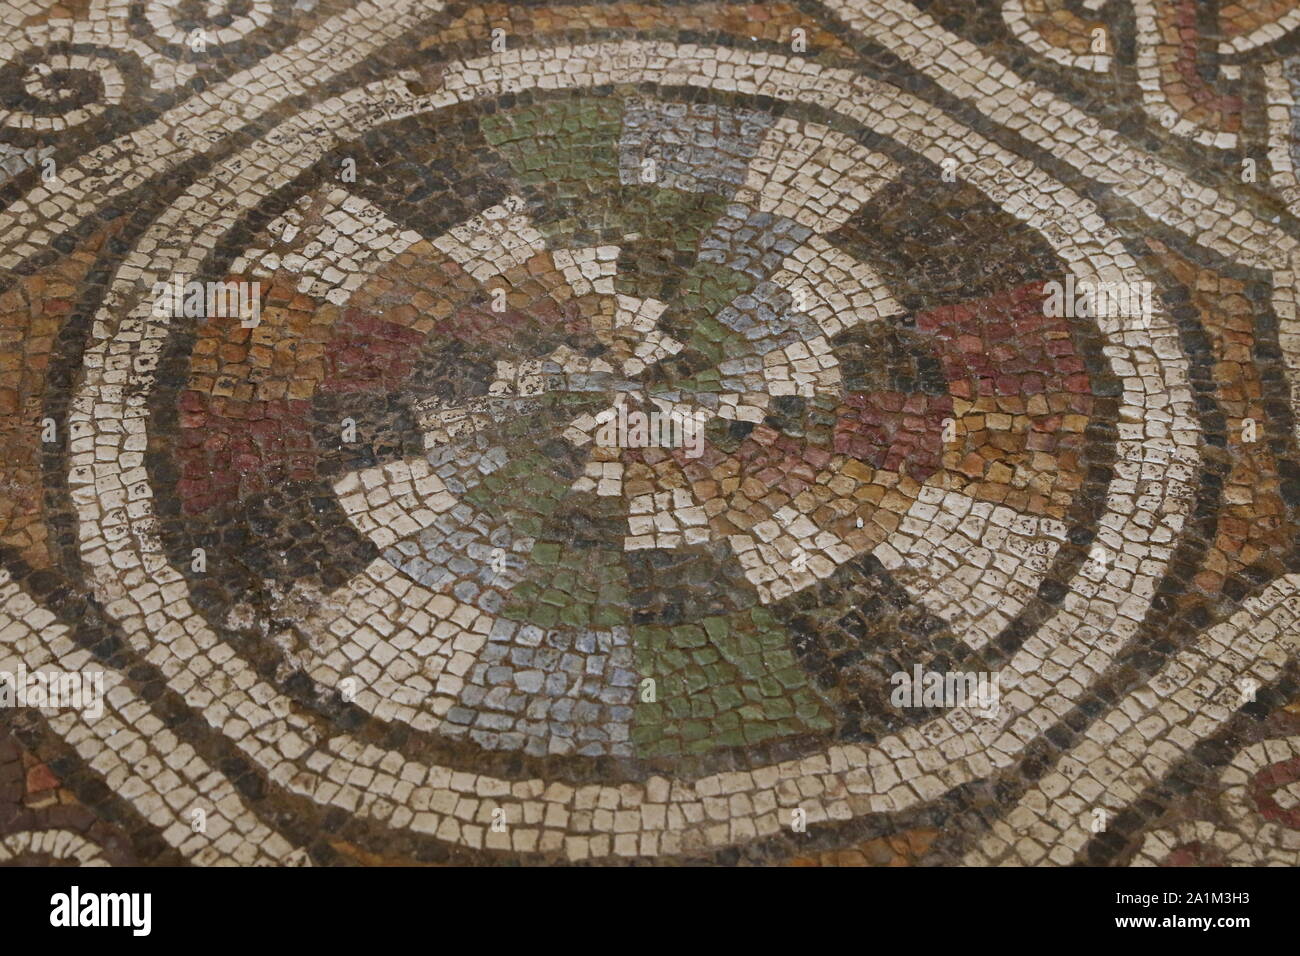 Roman mosaic floor located in archaeological site in The Bishop's Basilica of Philippopolis, the city of Plovdiv, Bulgaria. Mosaic floor. Roman mosaic Stock Photo